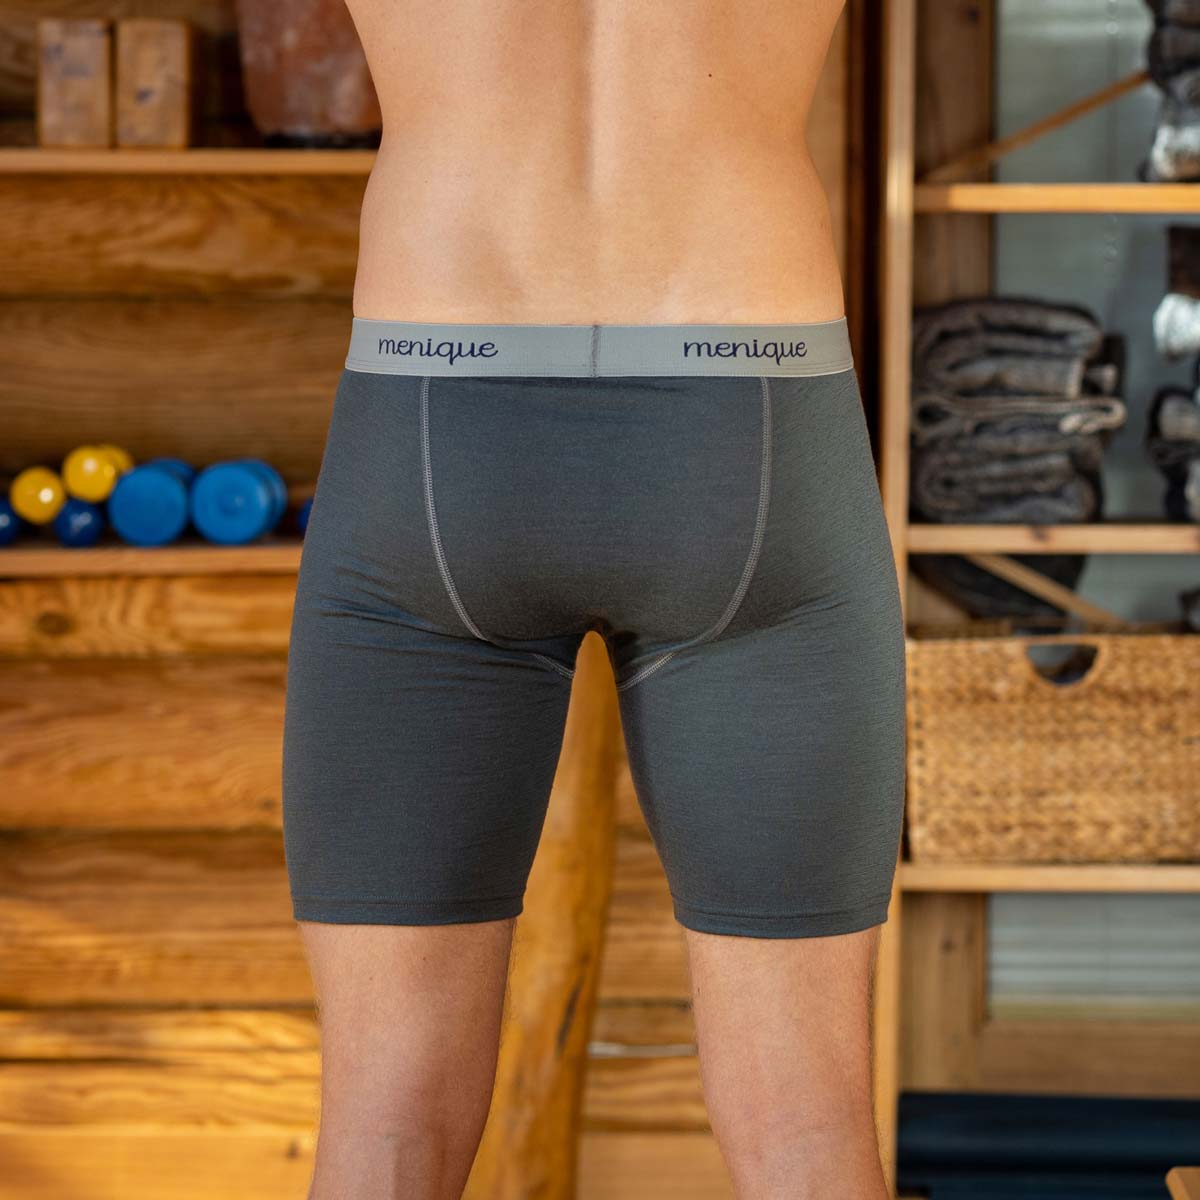 Is Smartwool boxer brief good? 